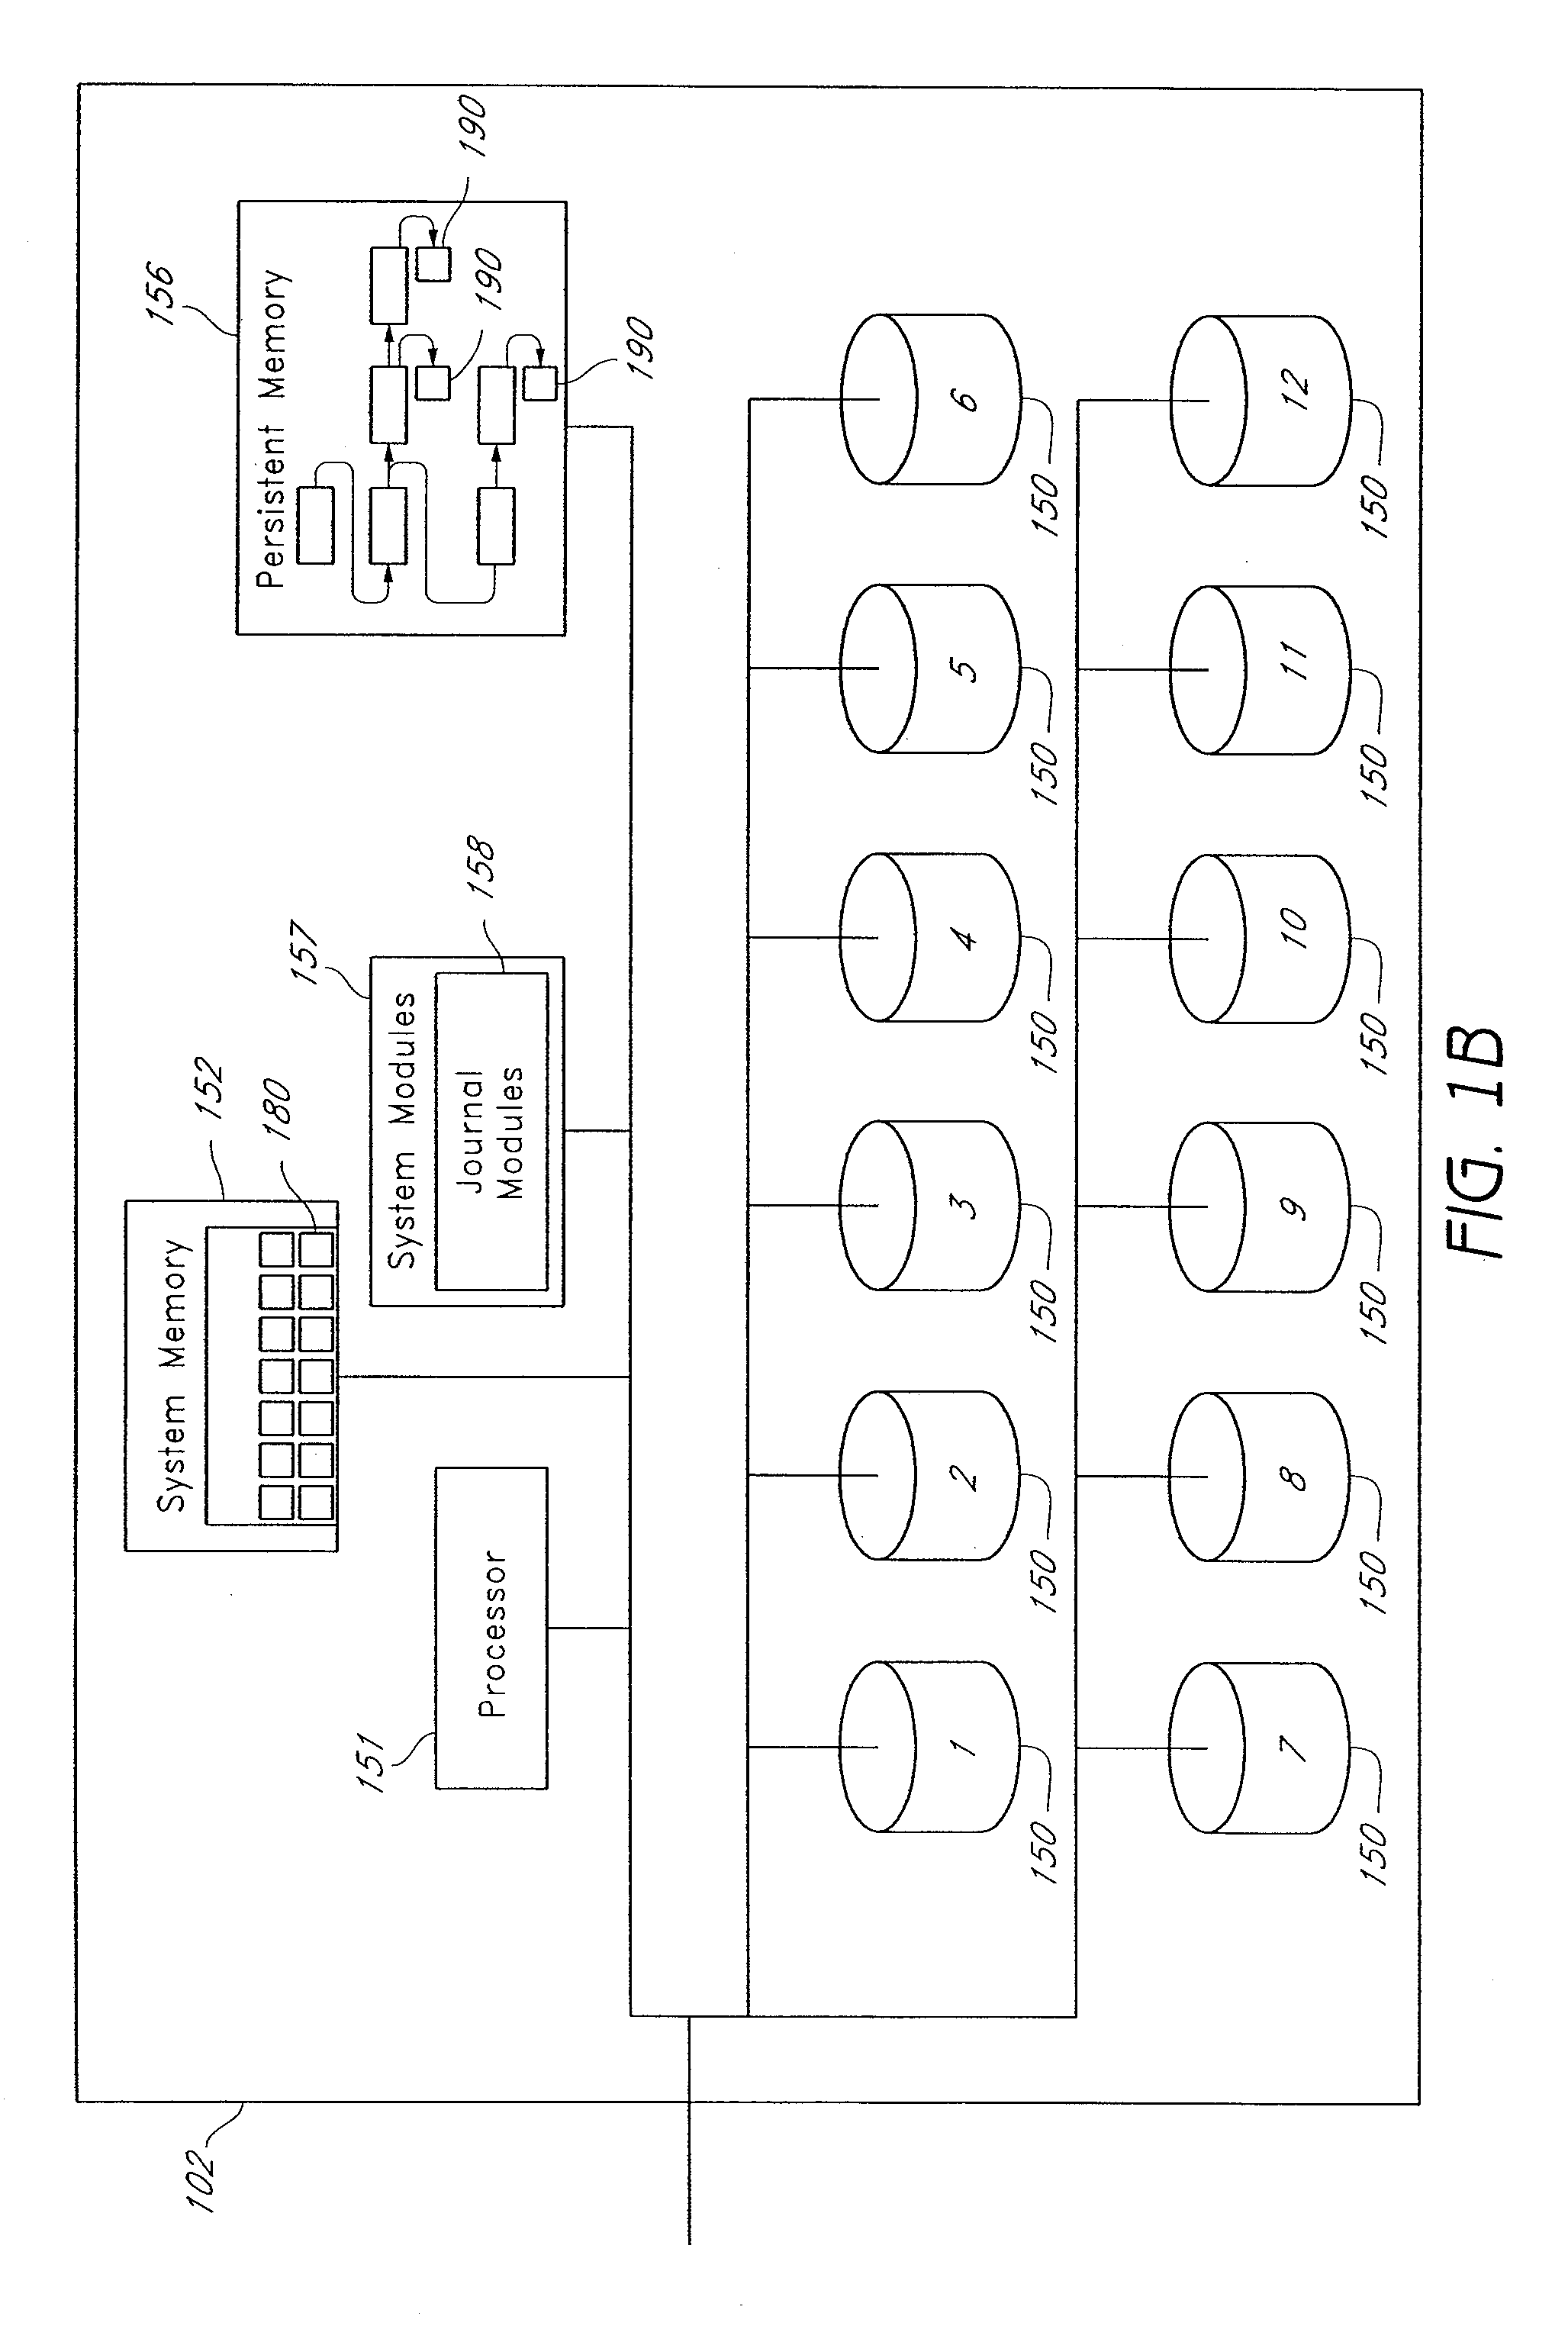 Systems and methods for providing nonlinear journaling